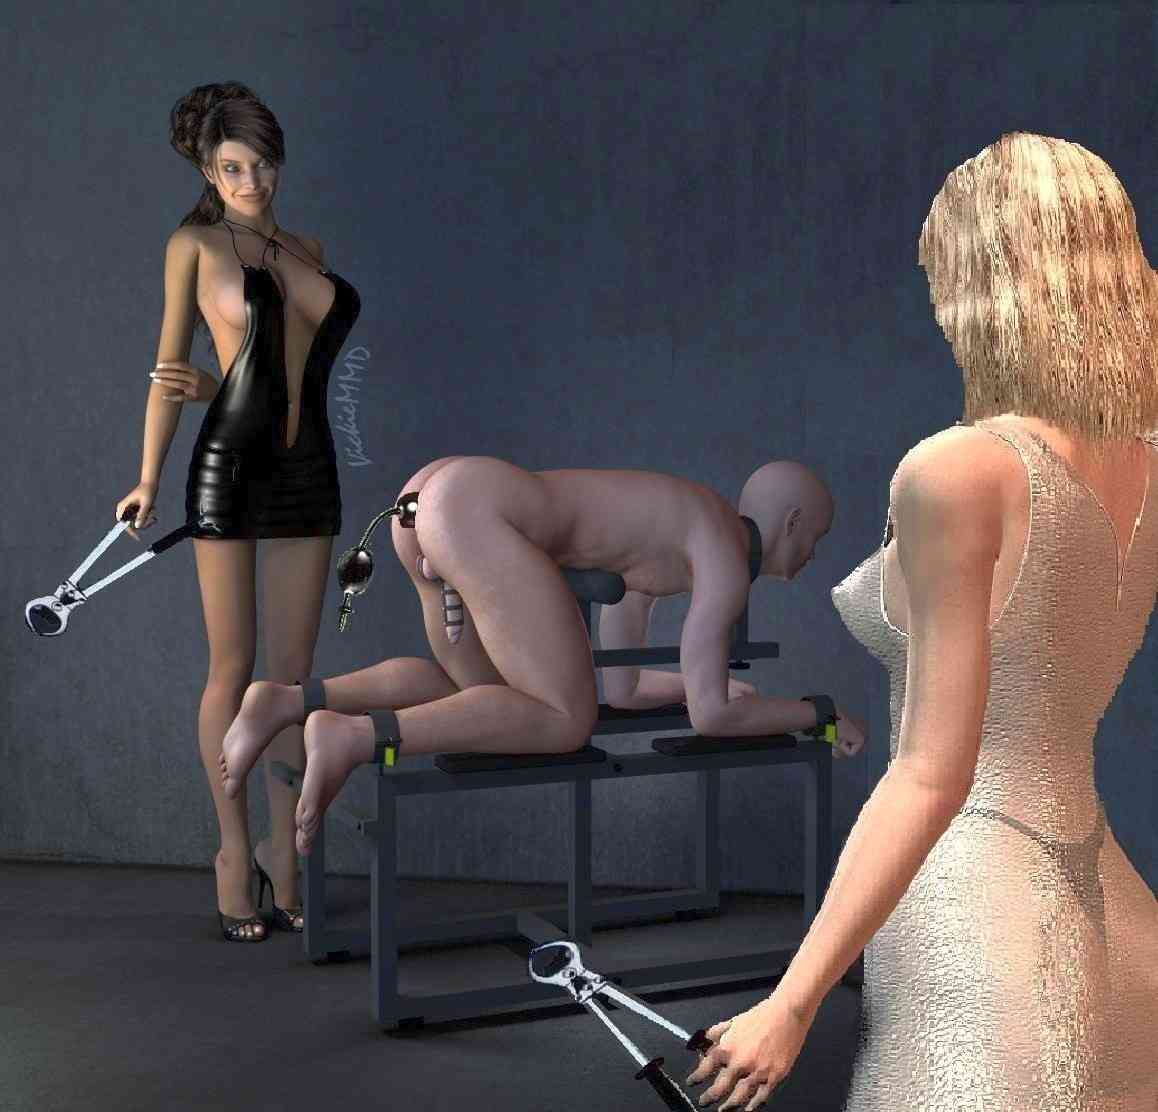 Beta Blackmail: A Sissy Caption story JavaScript is required for this websi...